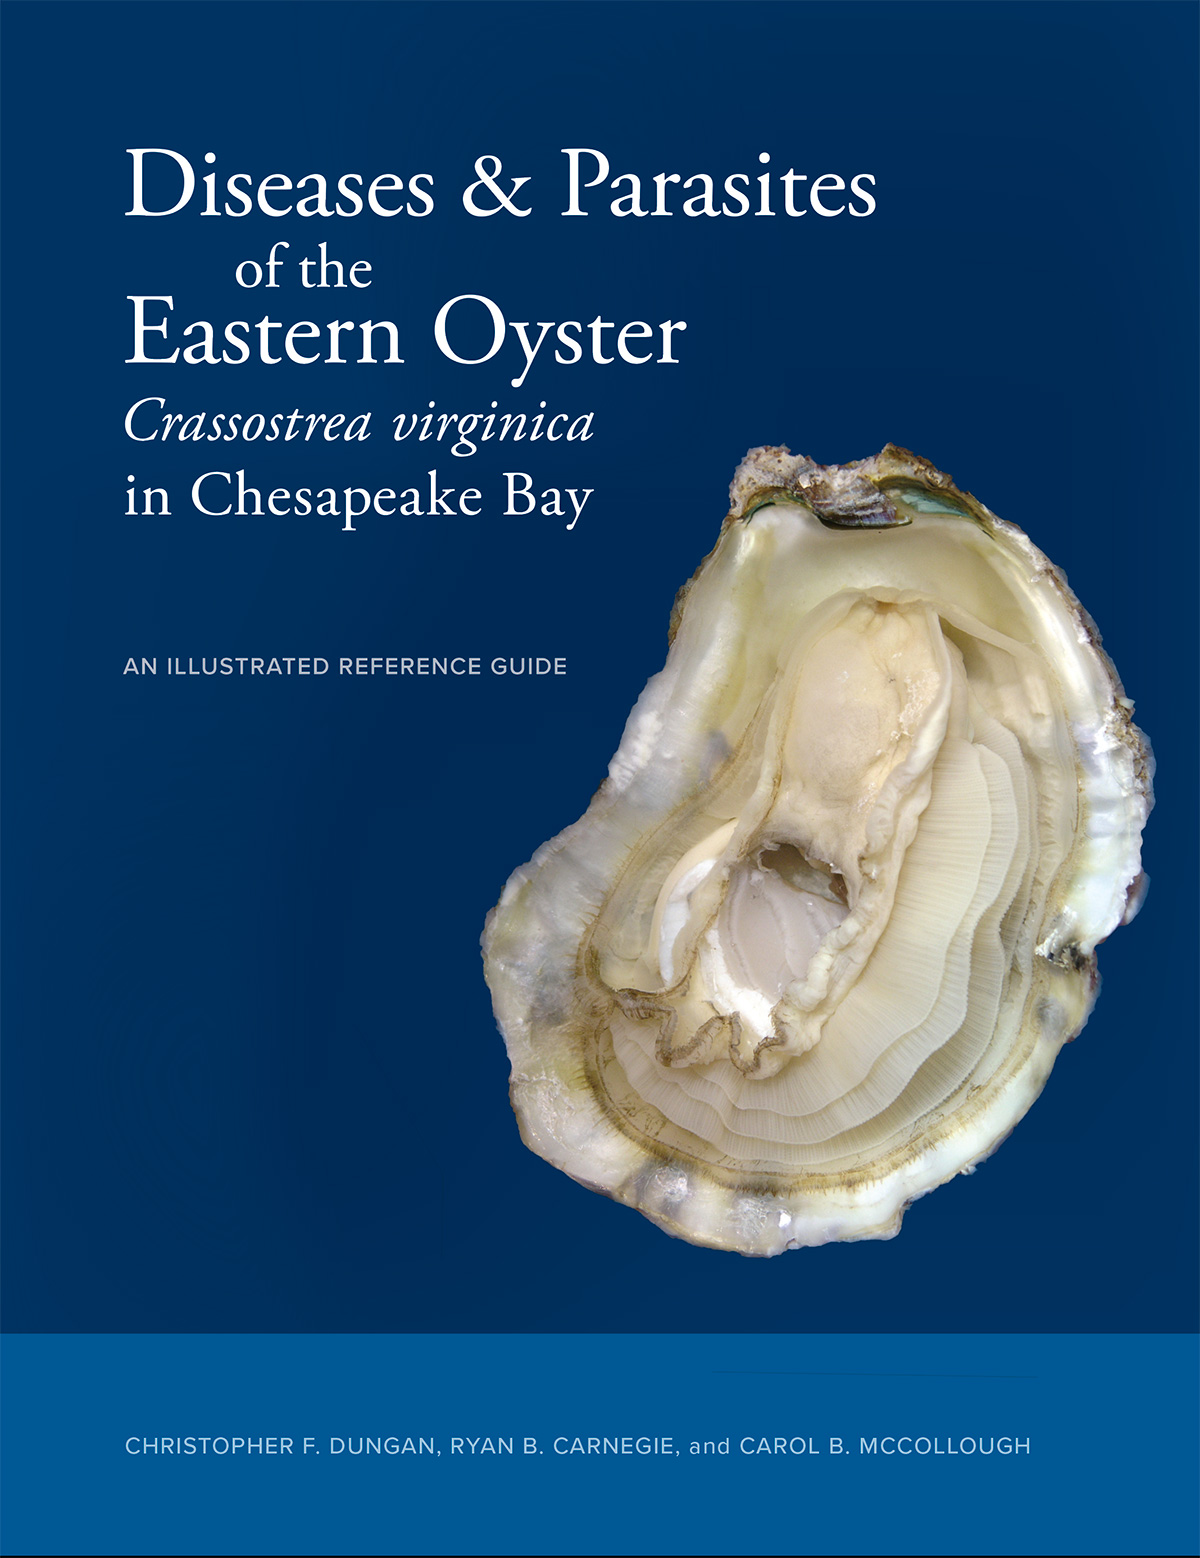 Book cover with image of oyster